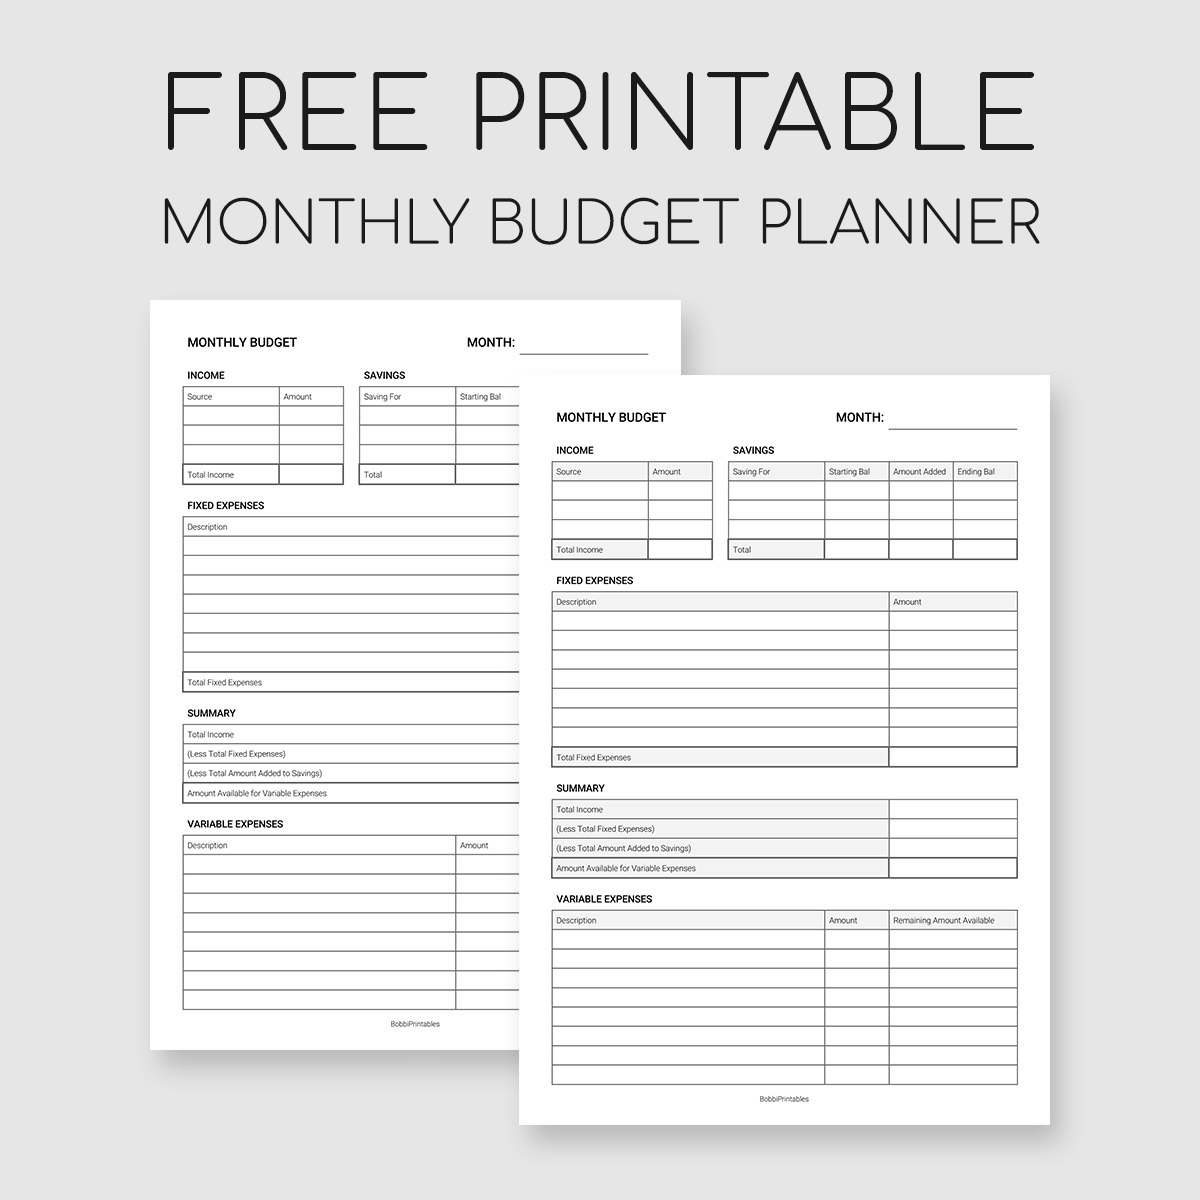 Printable Monthly Budget Planner throughout Free Printable Monthly Expenses Worksheet